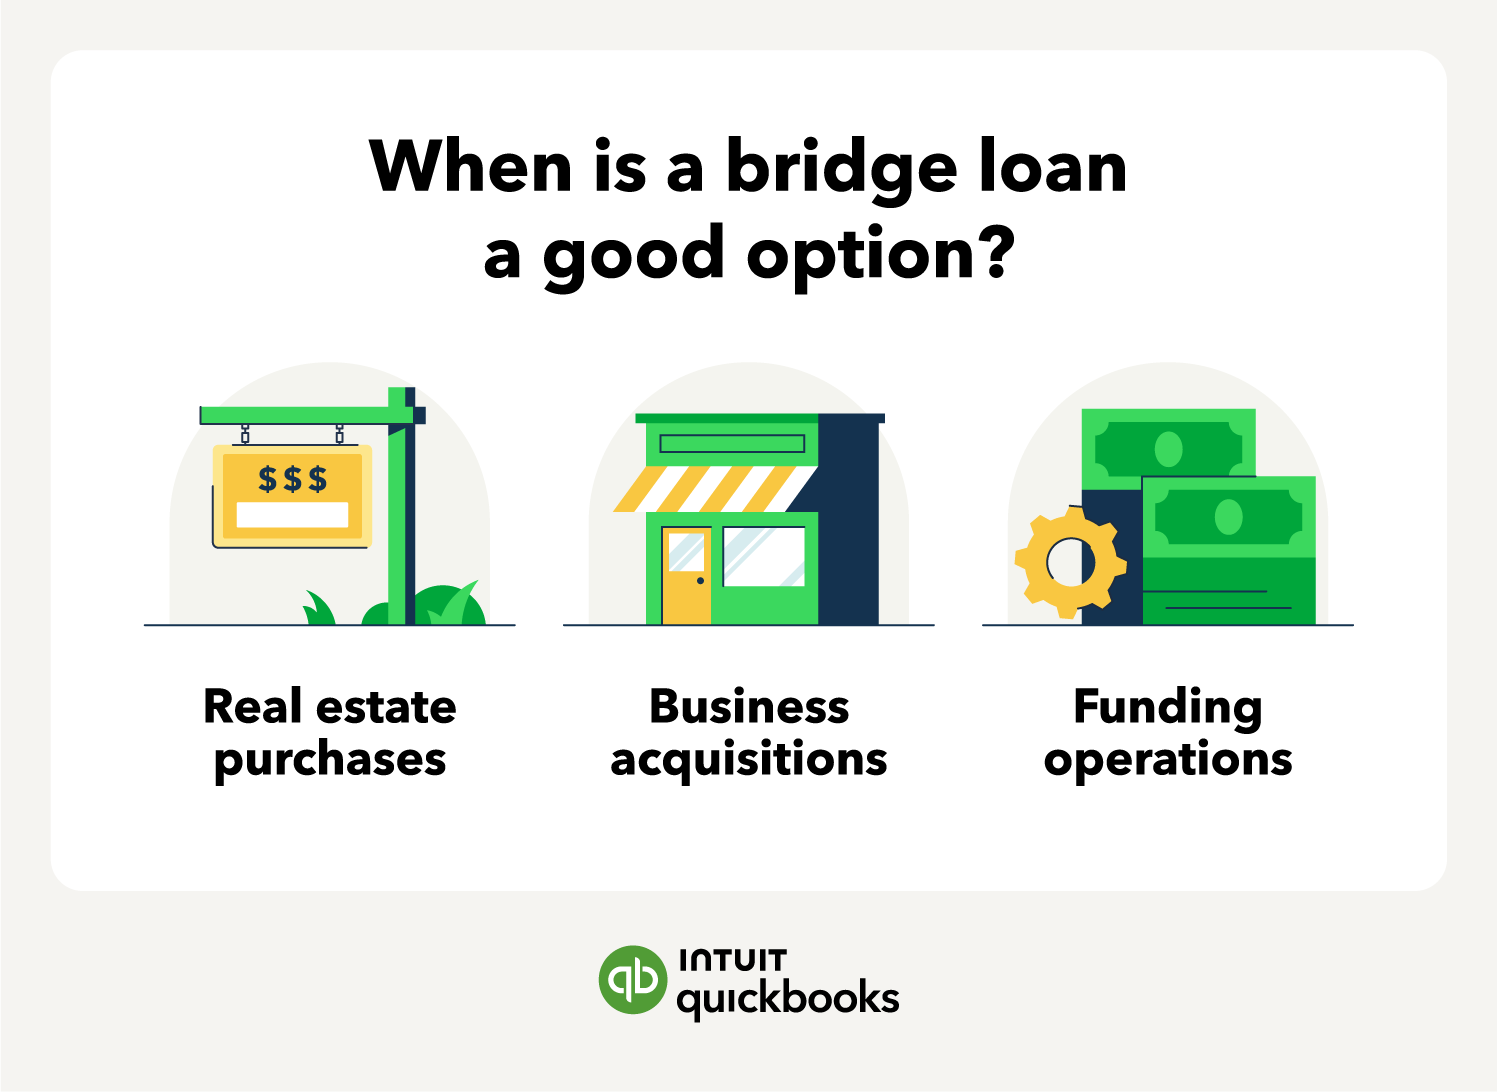 When is a bridge loan a good option? Real estate purchases, business acquisitions, funding operations.